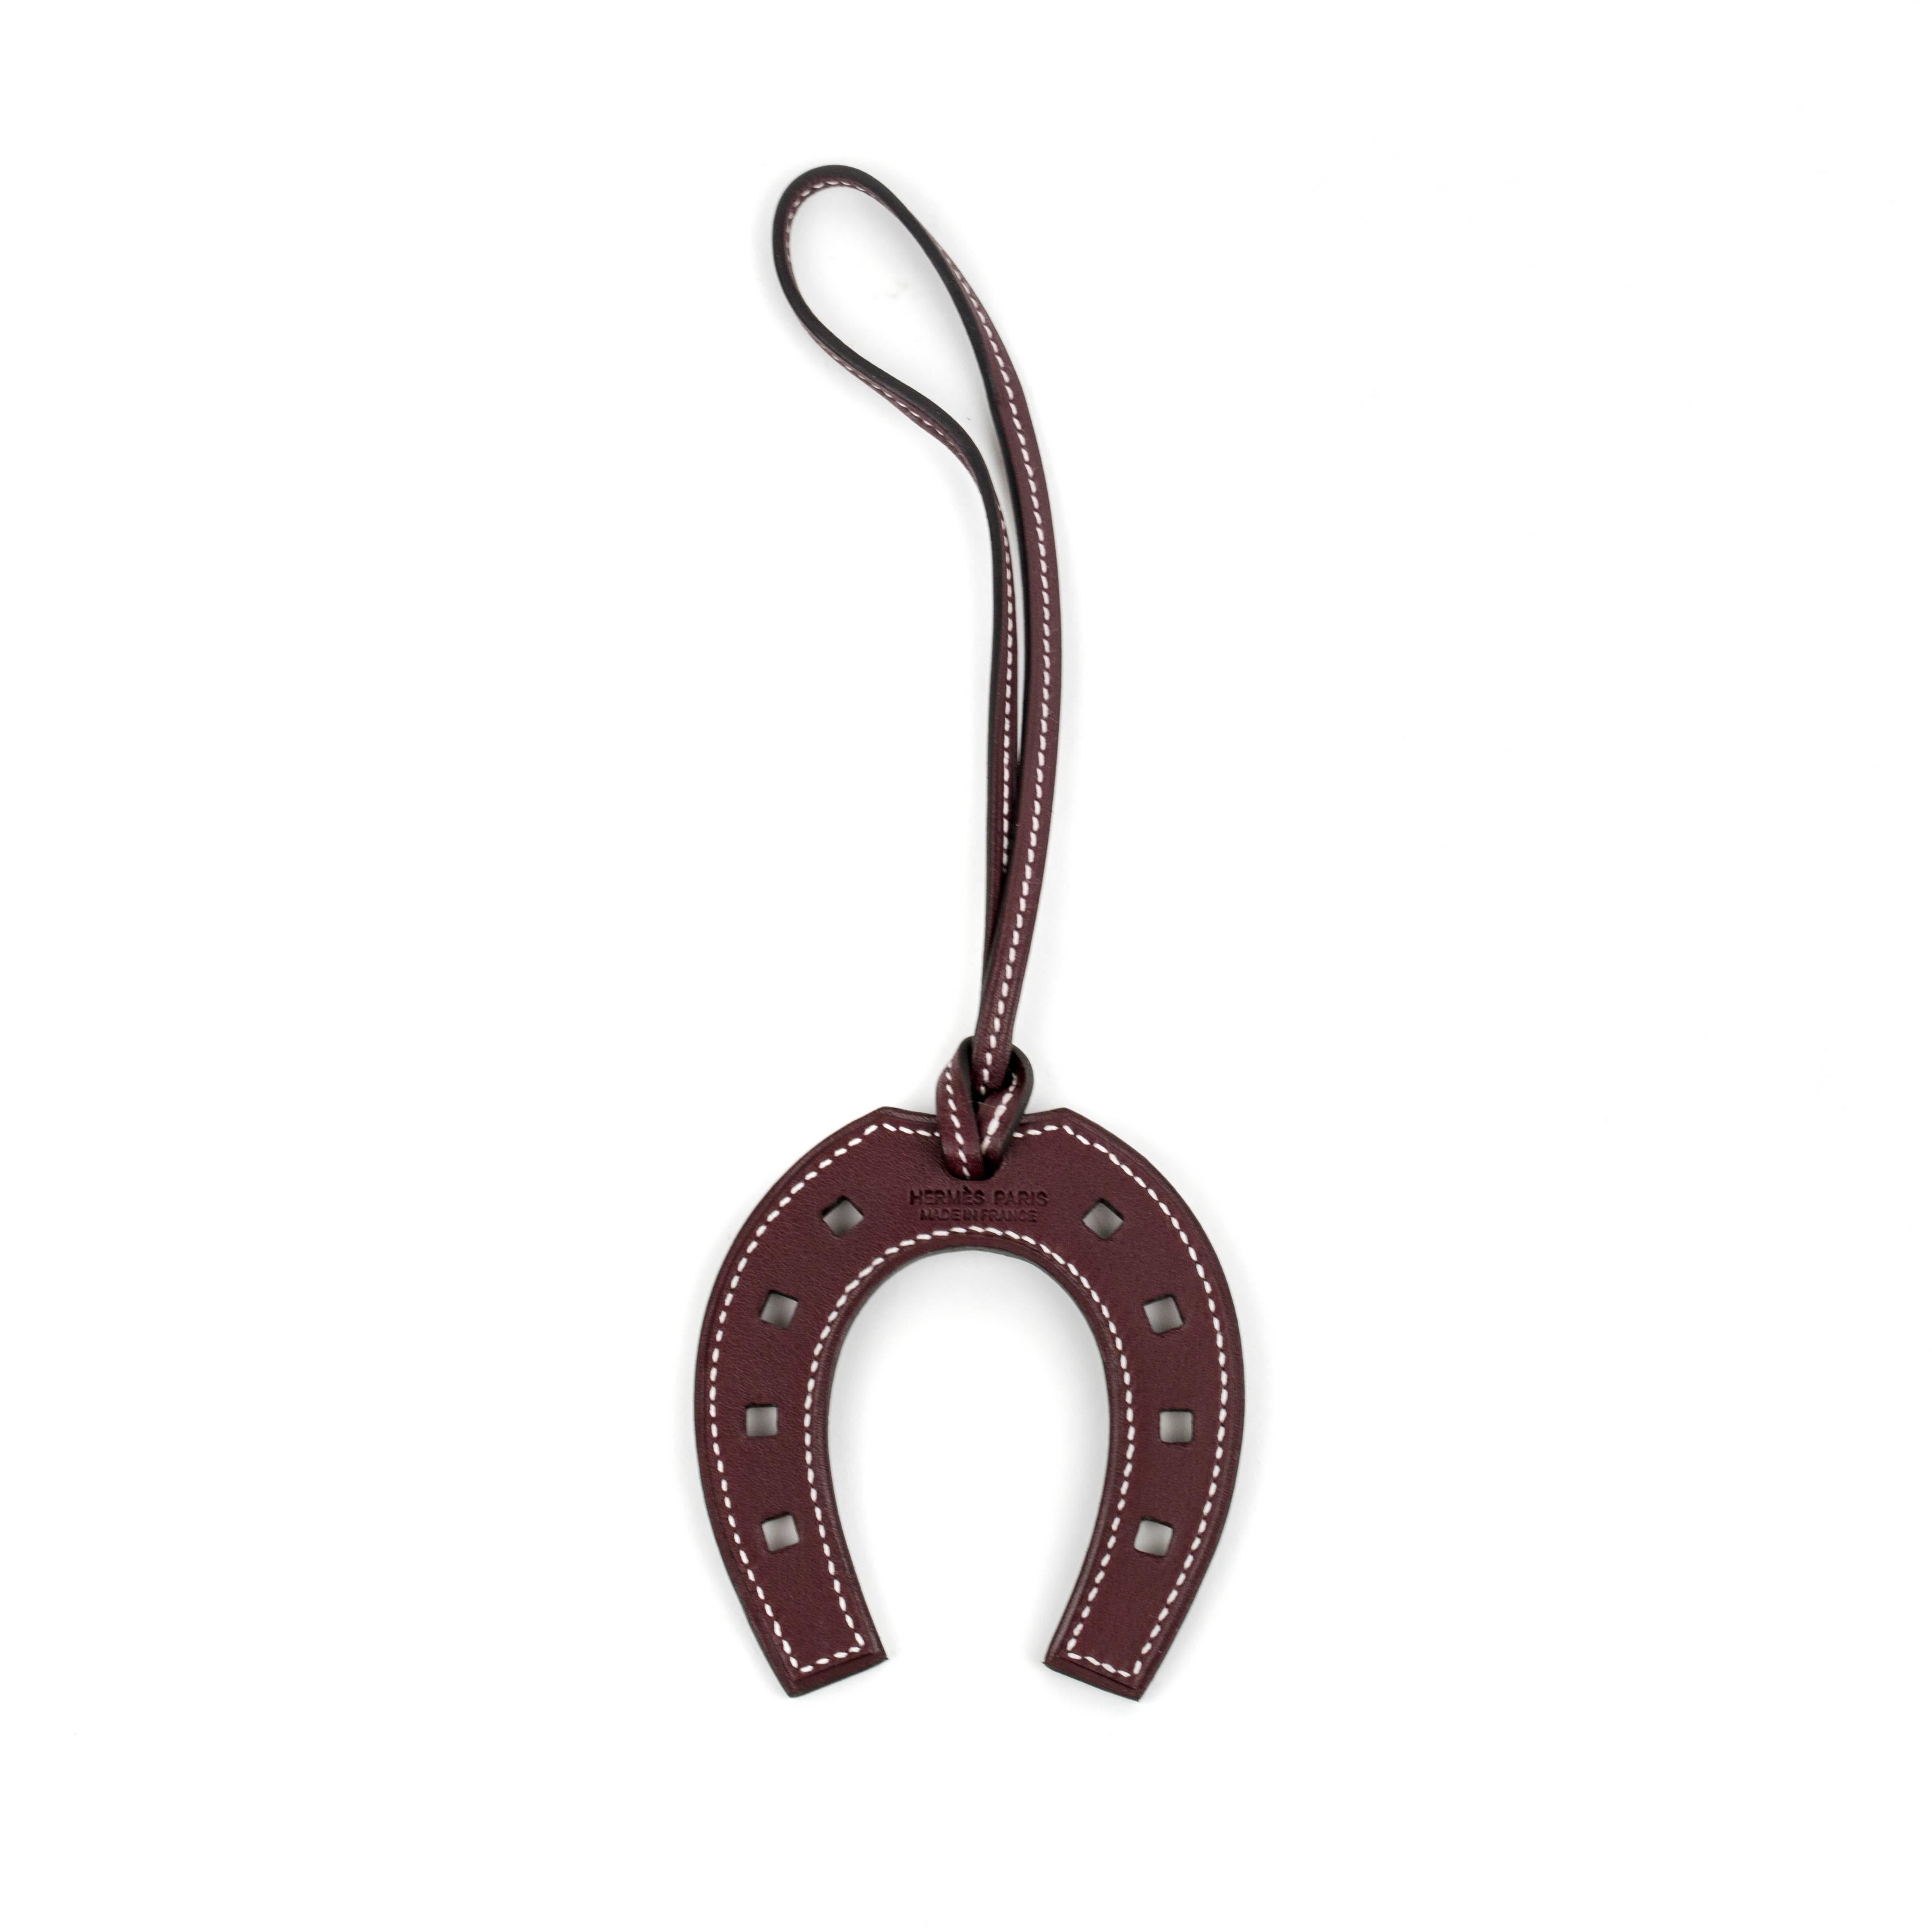 Brand New, fresh from store and never worn Hermes Paddock (Horseshoe Charm) in Bordeaux Color. This nice accessory for bag is extremely rare and not easy to get at boutique. The Paddock charm has been just picked up at Hermes store and selling as it